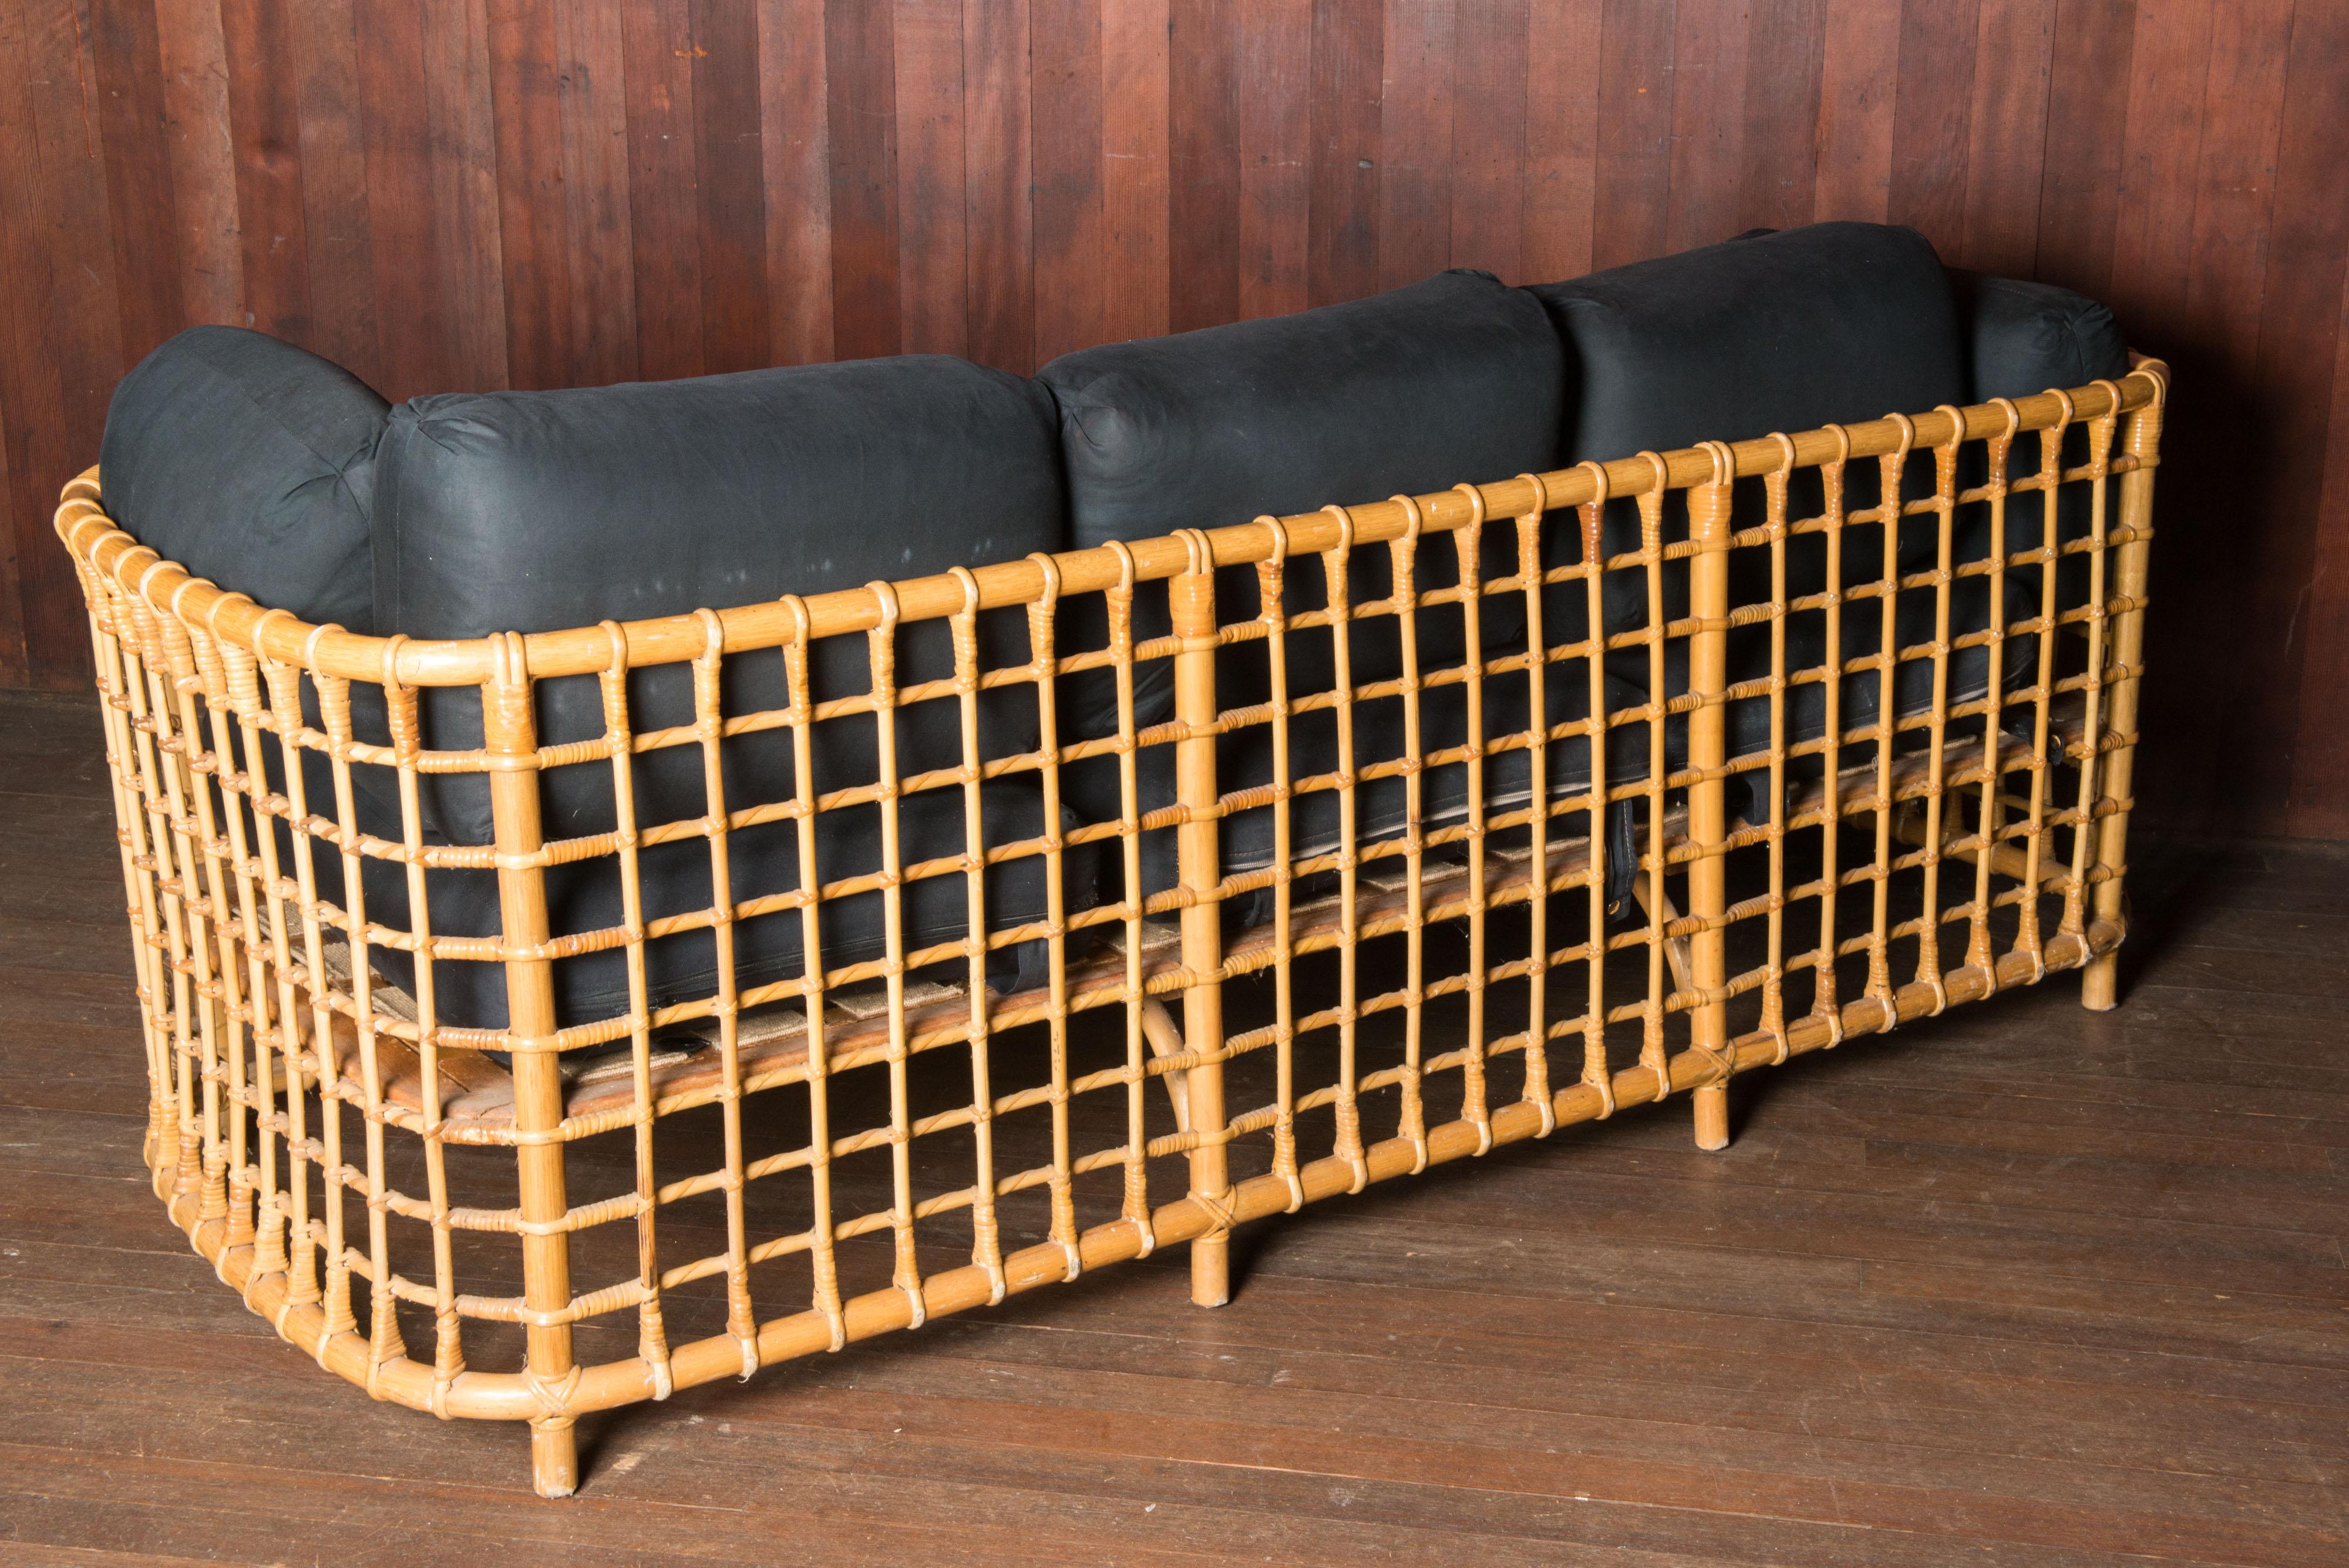 An exquisite and rare rattan sofa by accomplished Henry Olko for his Willow and Reed company, circa 1975. This unique sofa is from the Olko's Square series.
Substantial and sturdy rattan and hardwood construction with precision cane detail. A very